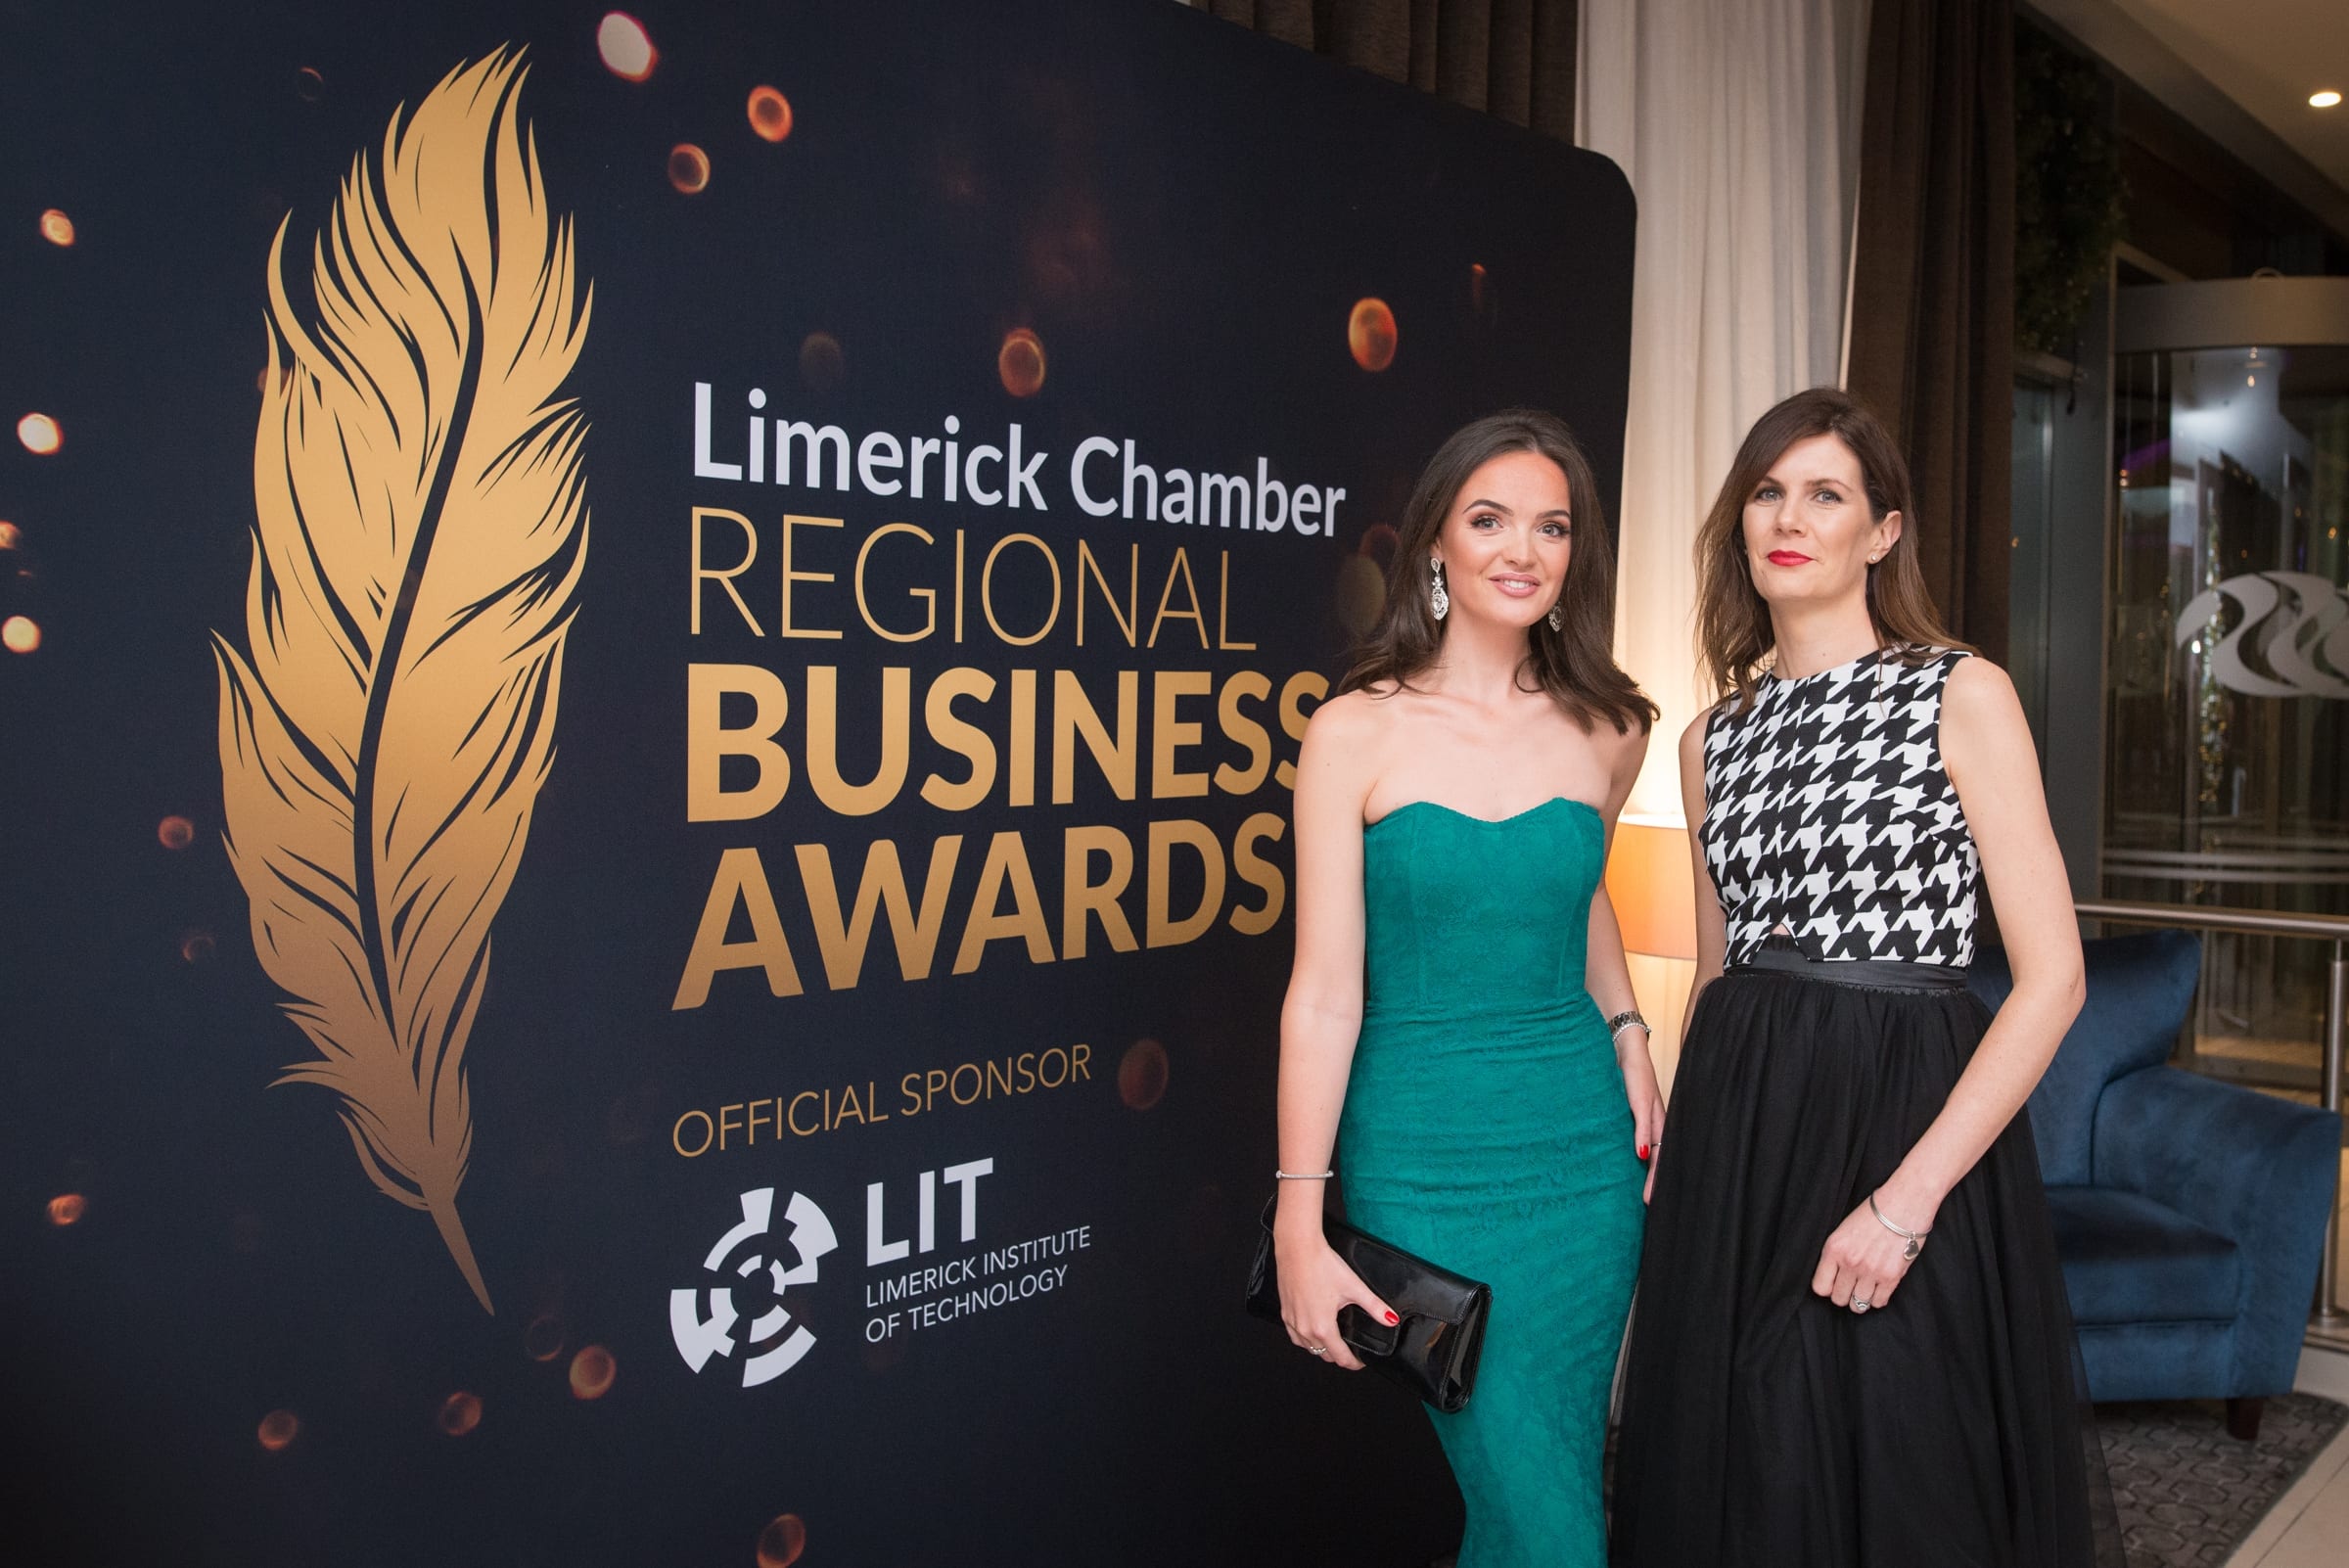 No repro fee- limerick chamber president's dinner- 16-11-2018, From Left to Right: Roisin Cahill - Northern Trust, Gemma Loughnane - Northern Trust.
Photo credit Shauna Kennedy